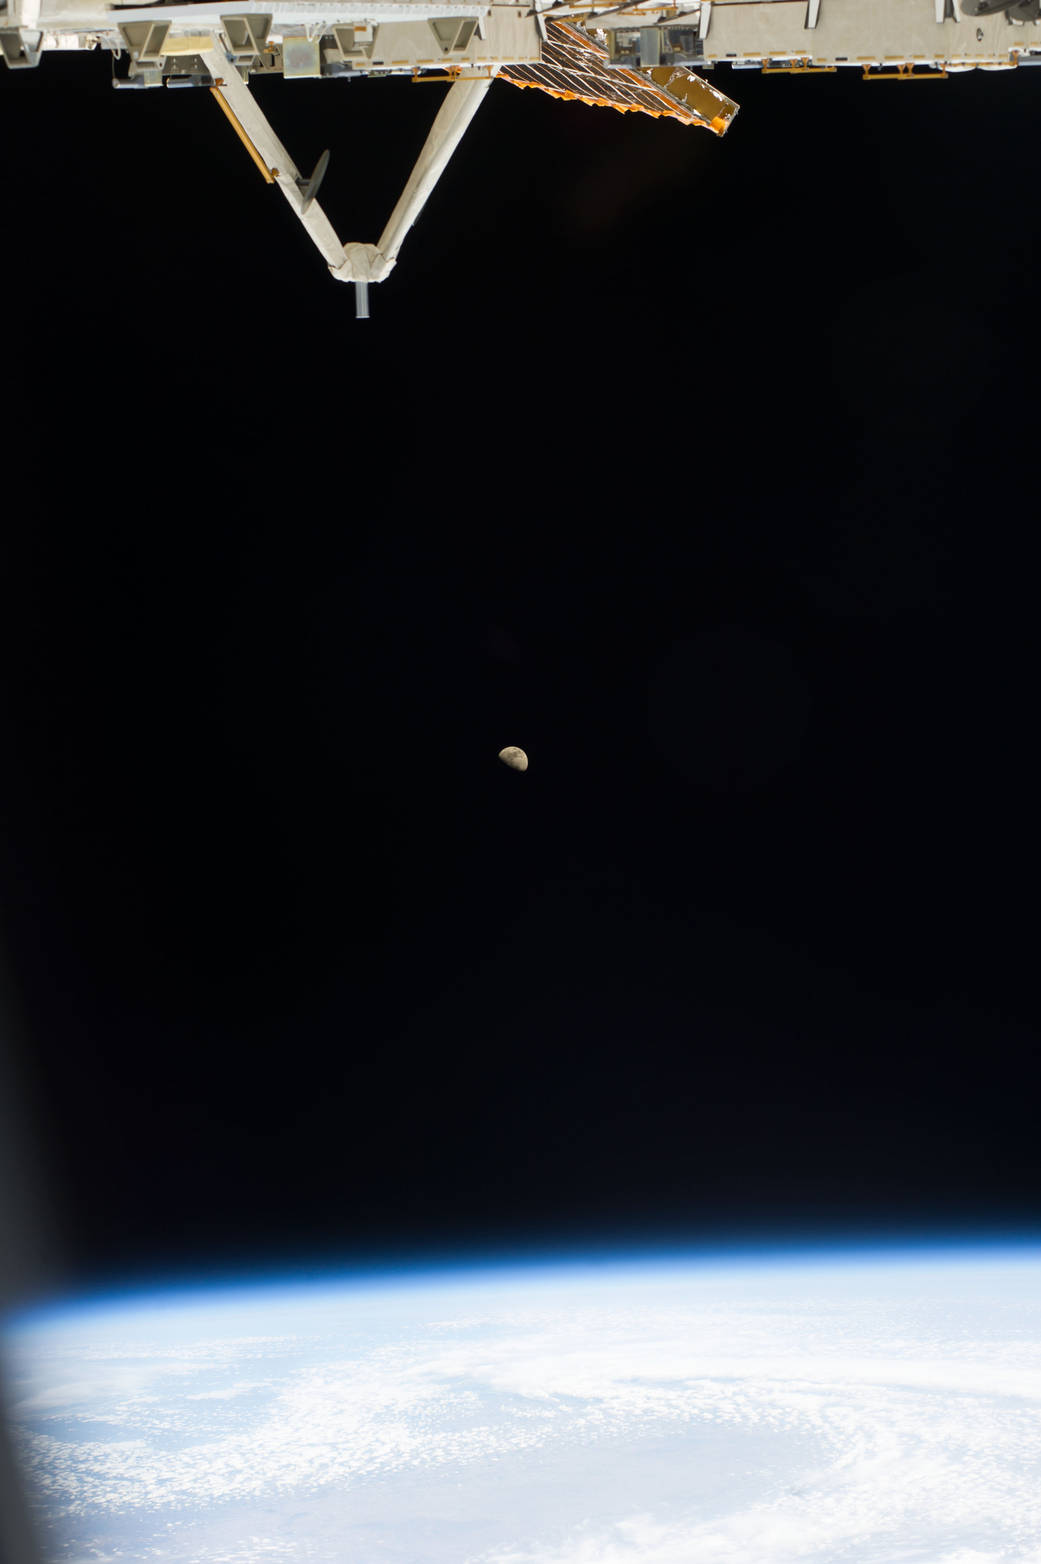 Moon Photographed From Space Station